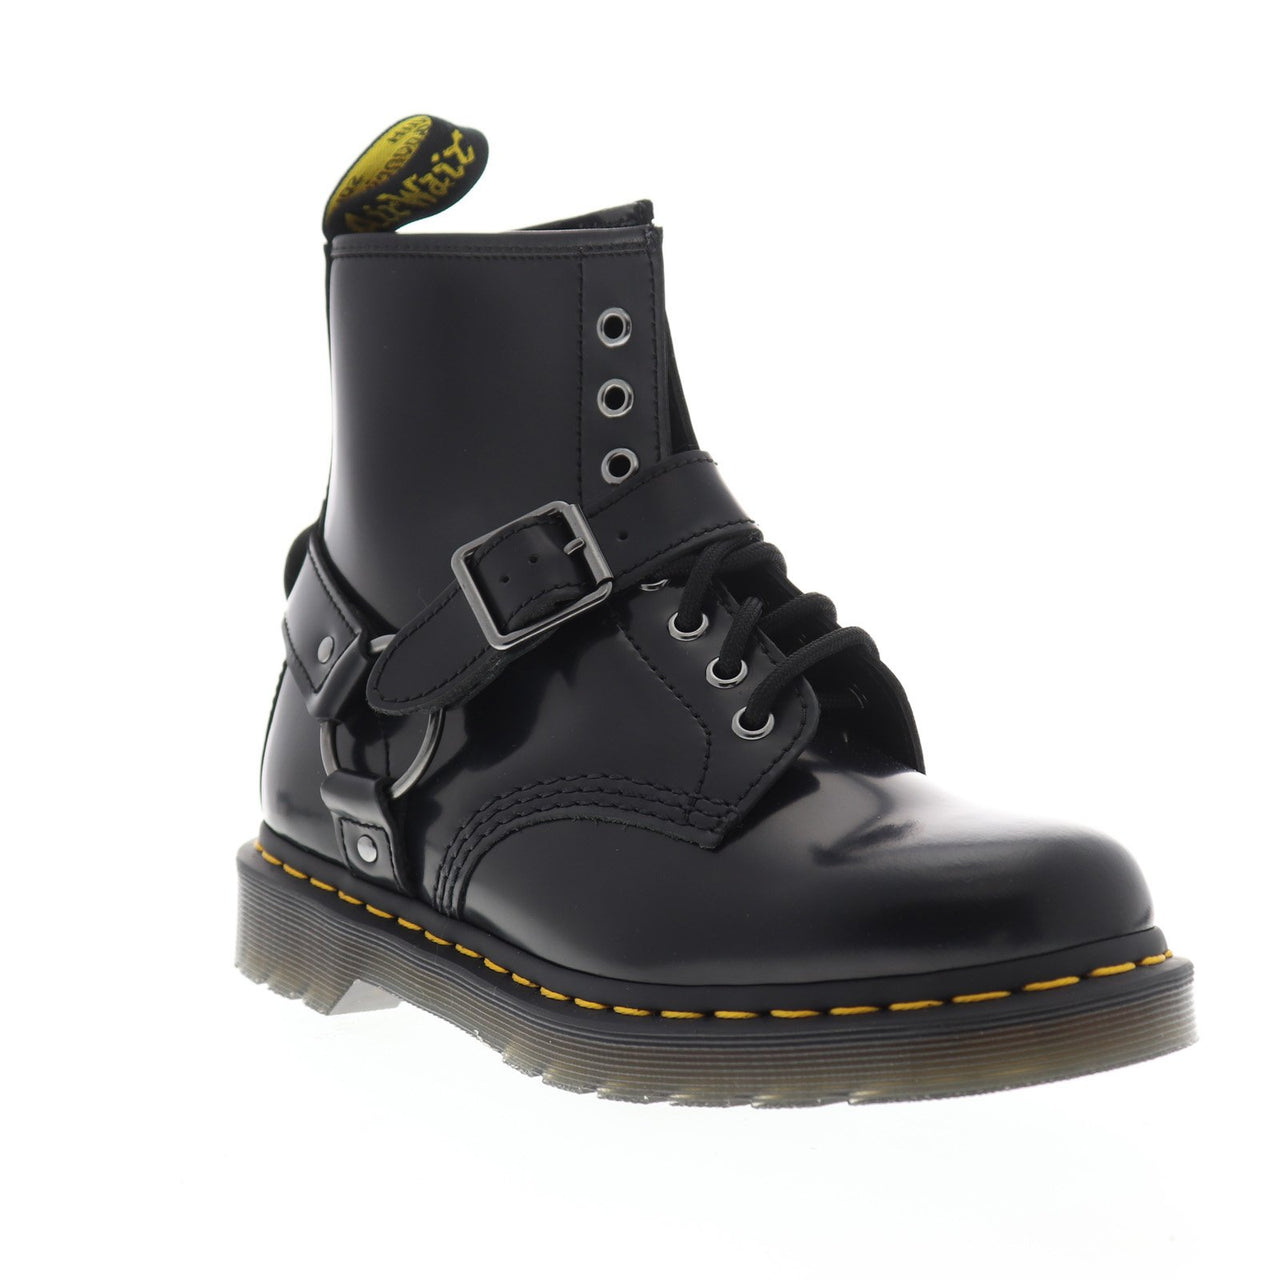 Dr. Martens 1460 Harness R25163001 Womens Black Leather Casual Dress B ...